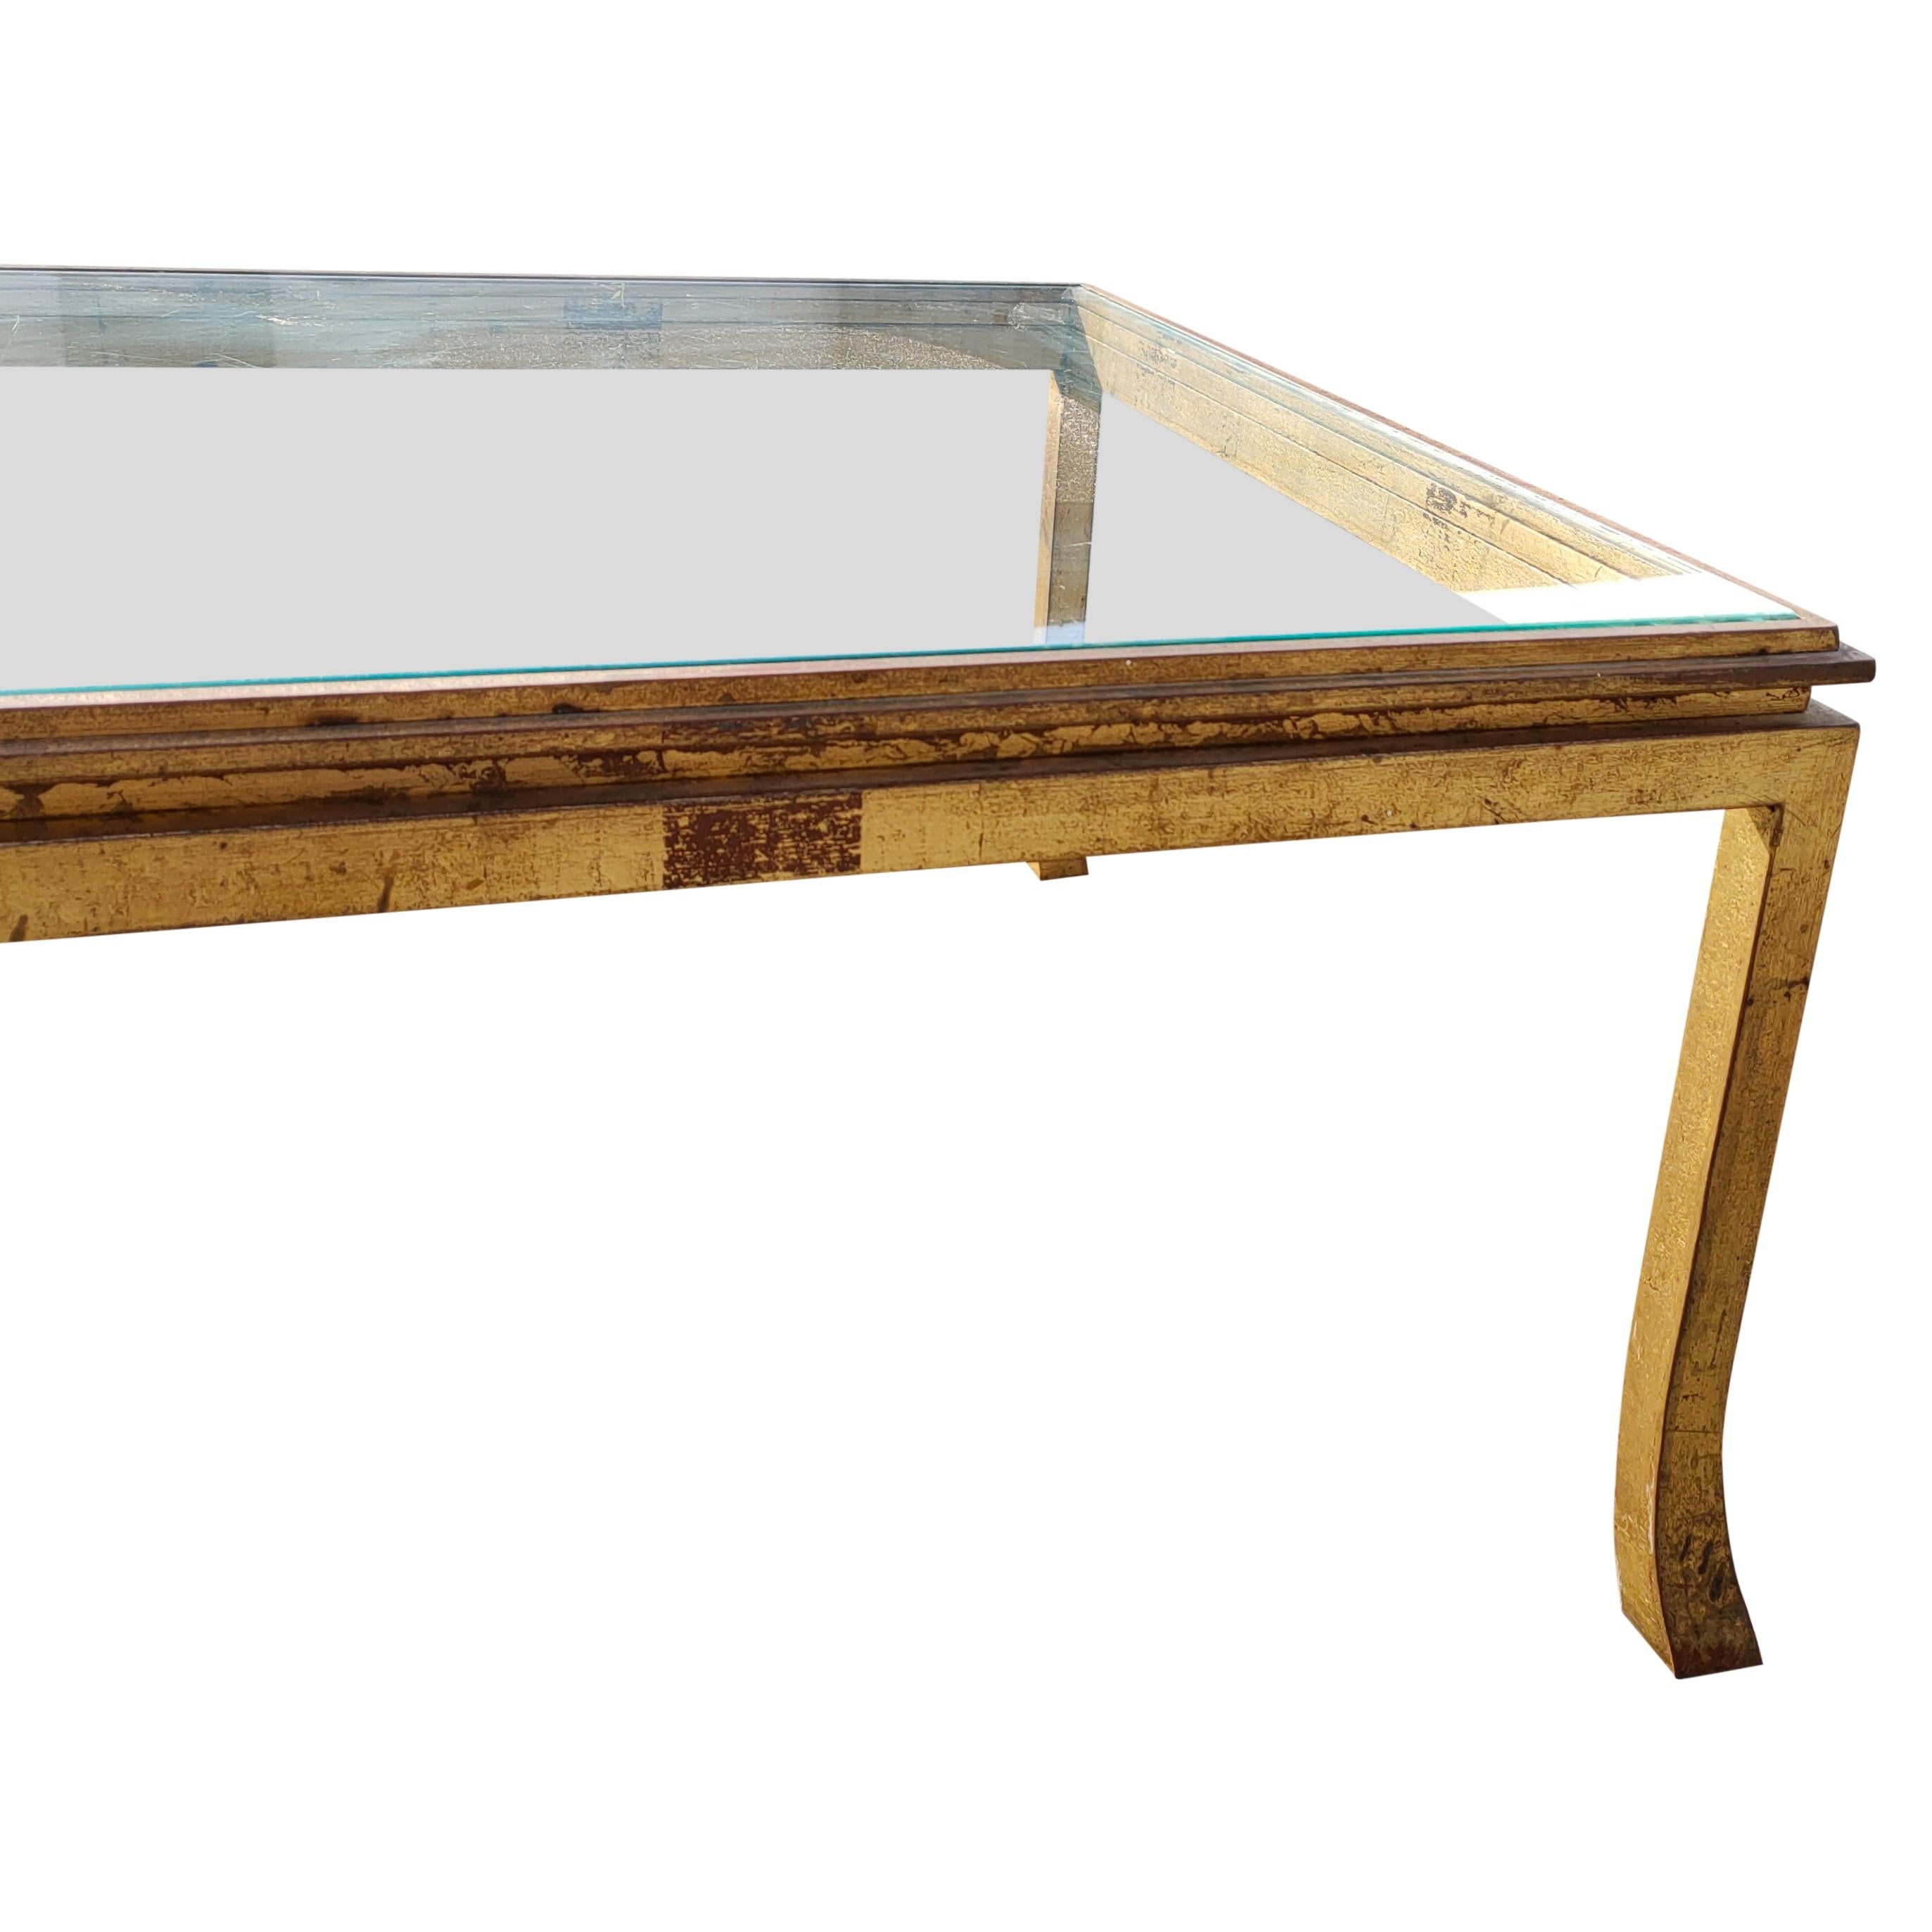 Late 1960s solid iron table for Maison Ramsay France
gold leaf over Ramsay signature red patina
in good vintage condition
some superficial areas of minor fading on gold leaf
the table will ship without the glass top
bespoke glass top can be